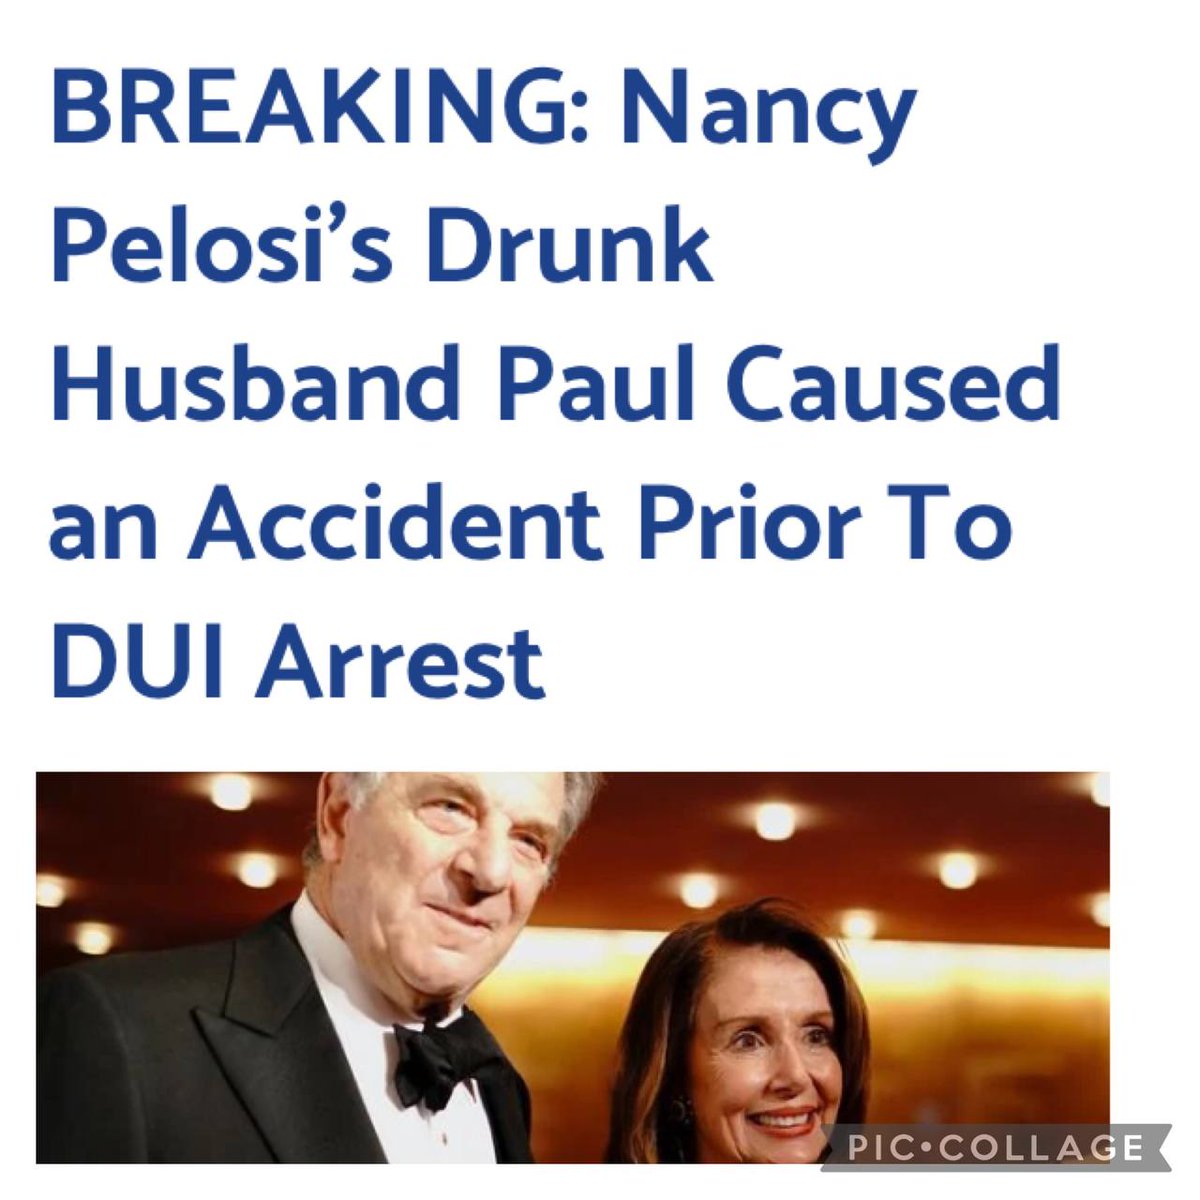 Police waited FOUR Hours to give him a breathalyzer test???

This, after he caused an accident?

What do you call this privilege?

#Scandalous #Entitled #EntitledPrick #entitlement #entitledcriminal #entitledliberals #MafiaGovernment #Pelosi #DUI #nancypelosi